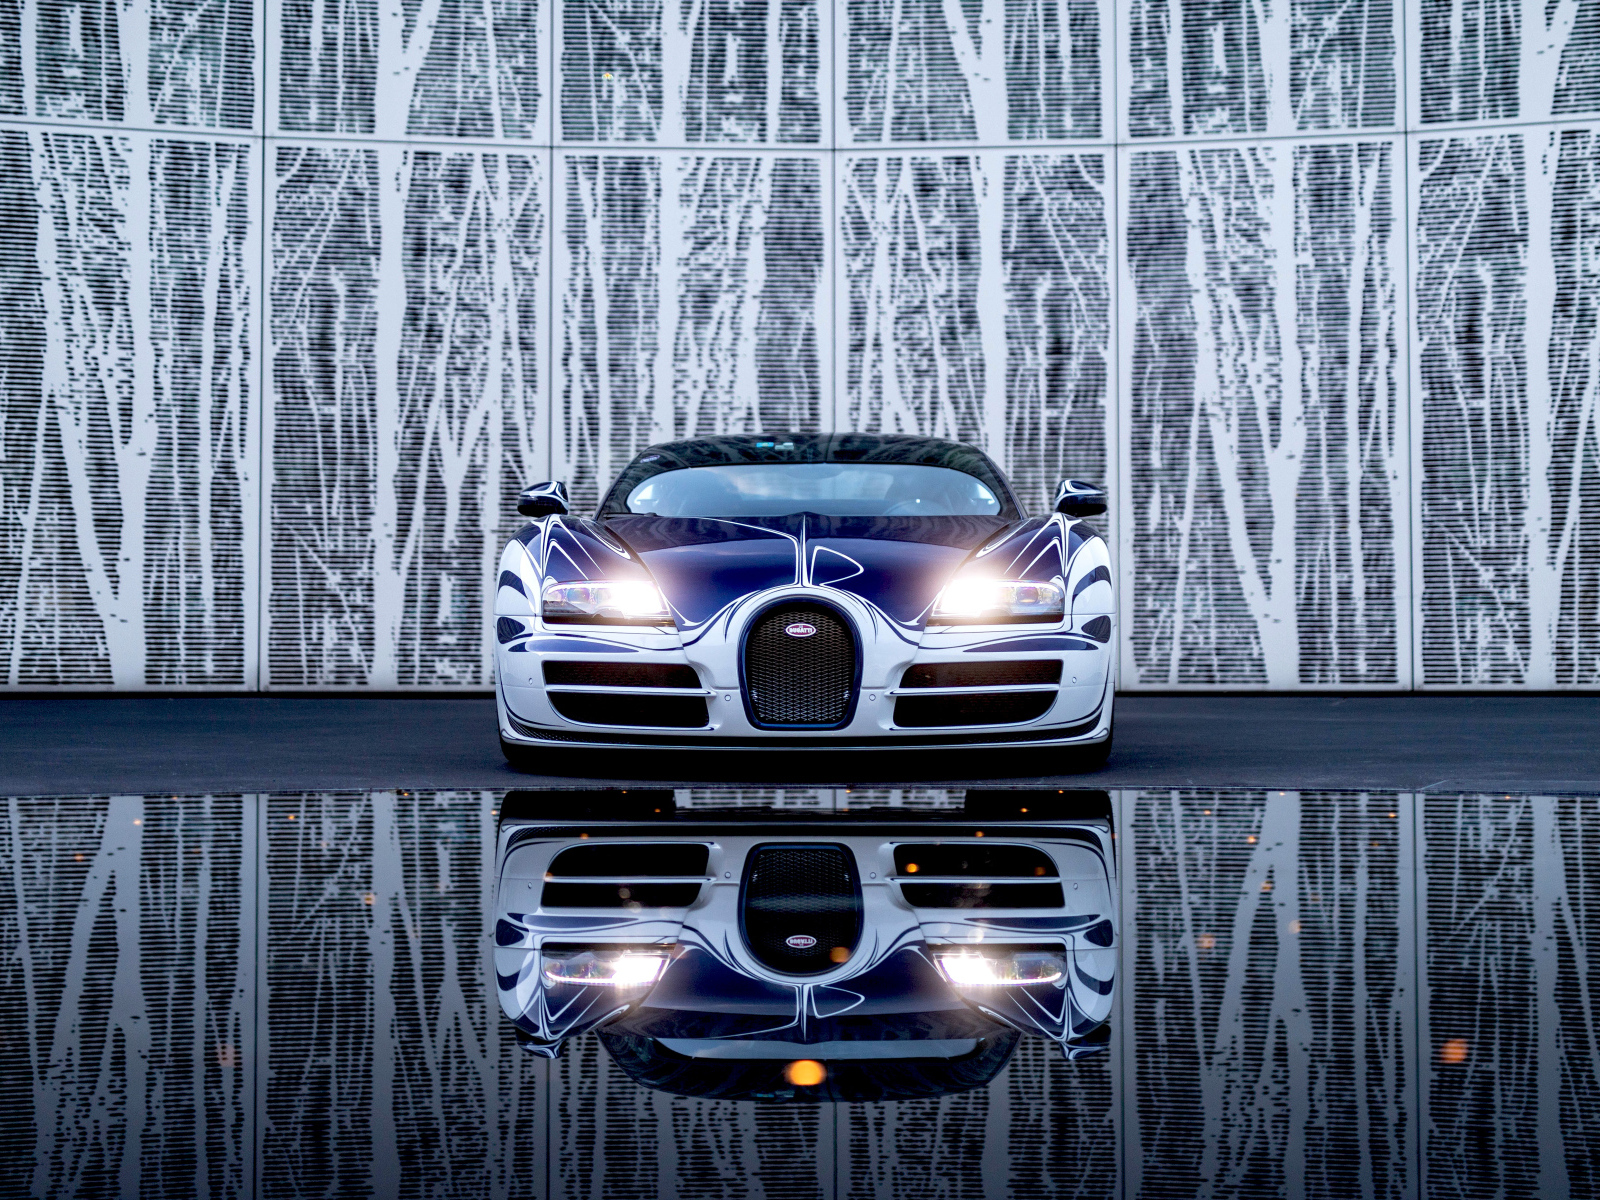 Car Bugatti Veyron Grand Sport Roadster is reflected in the mirror surface